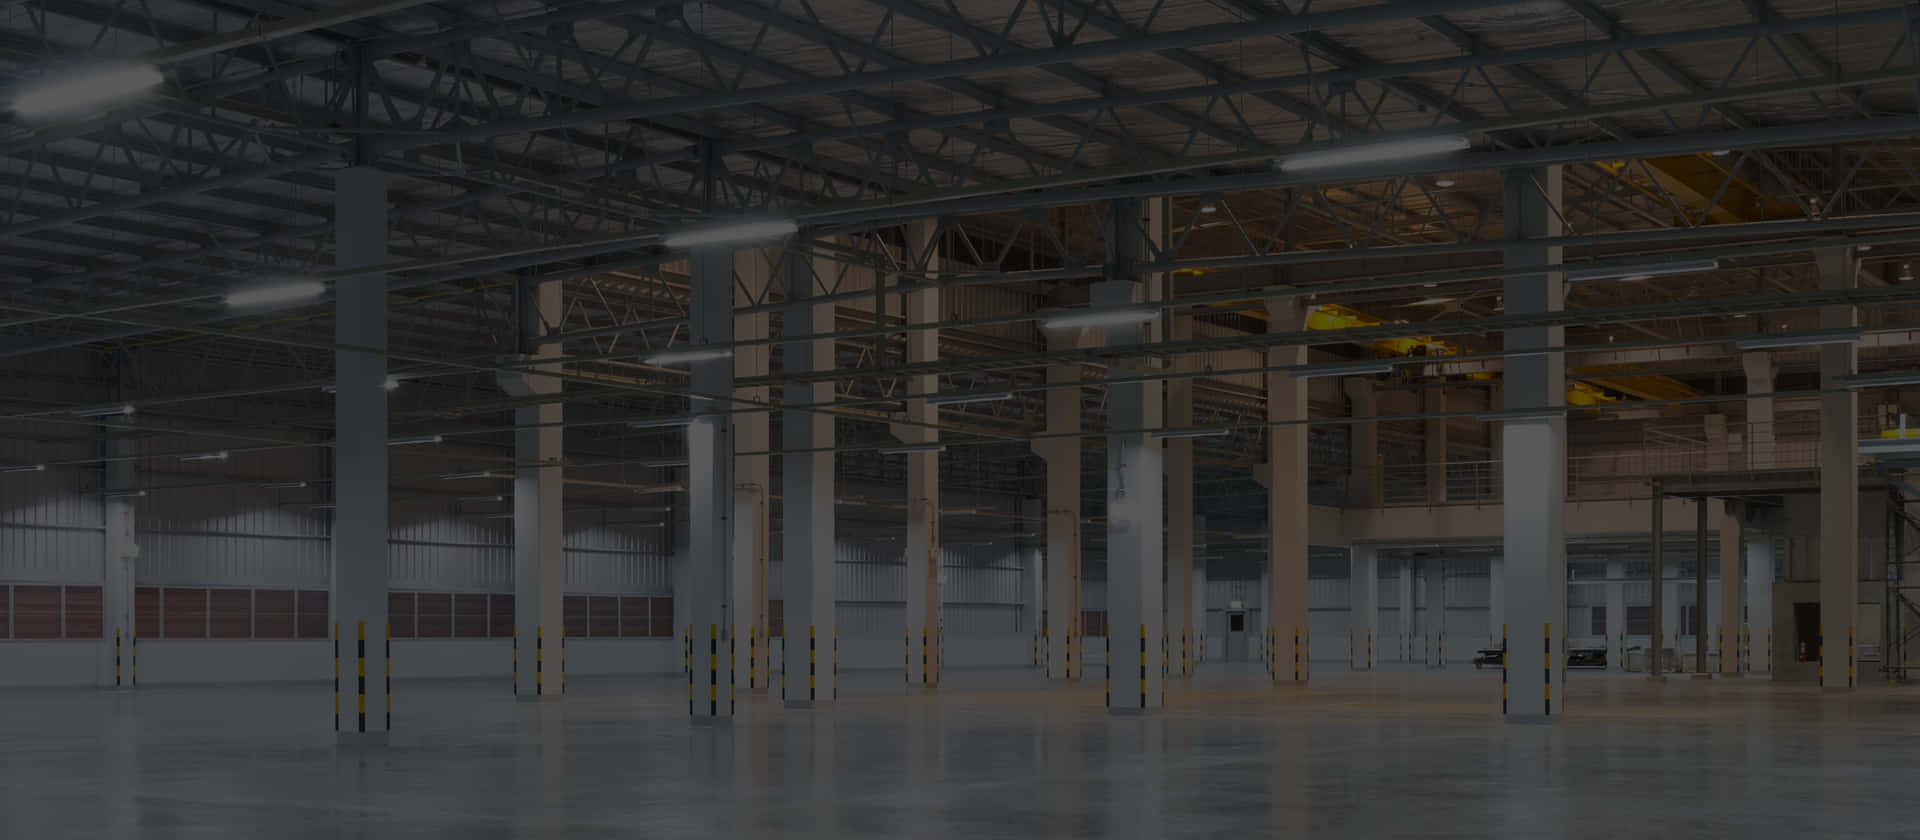 Inside look at an automated warehouse